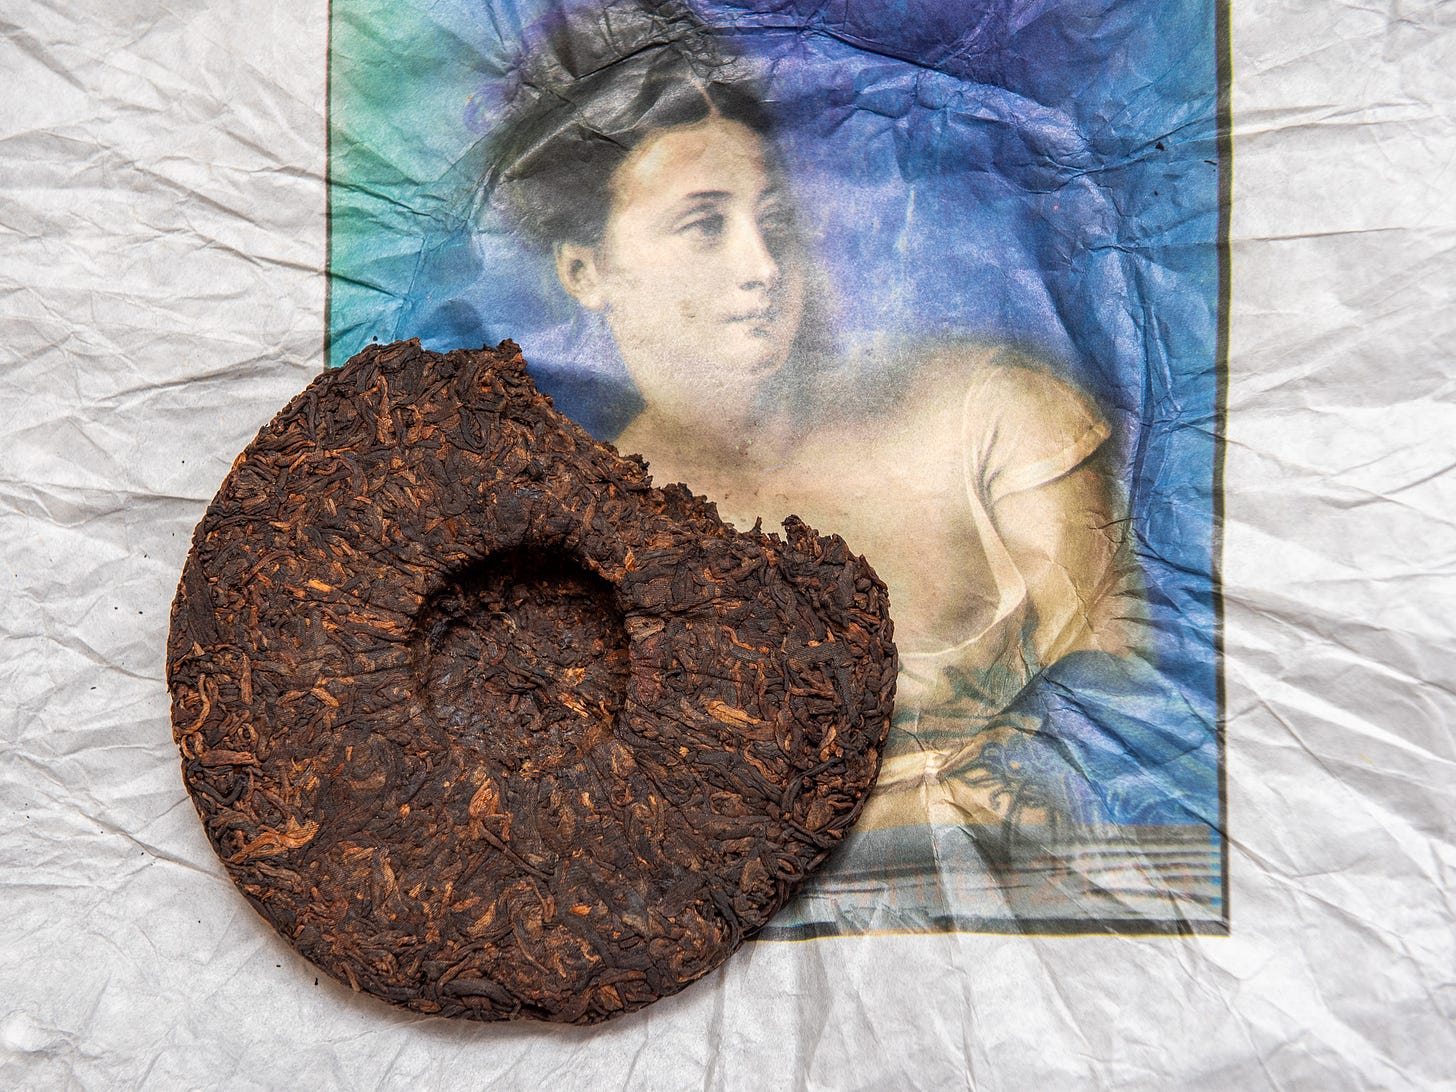 ID: Smokeshou ripe puer cake on top of its wrapper